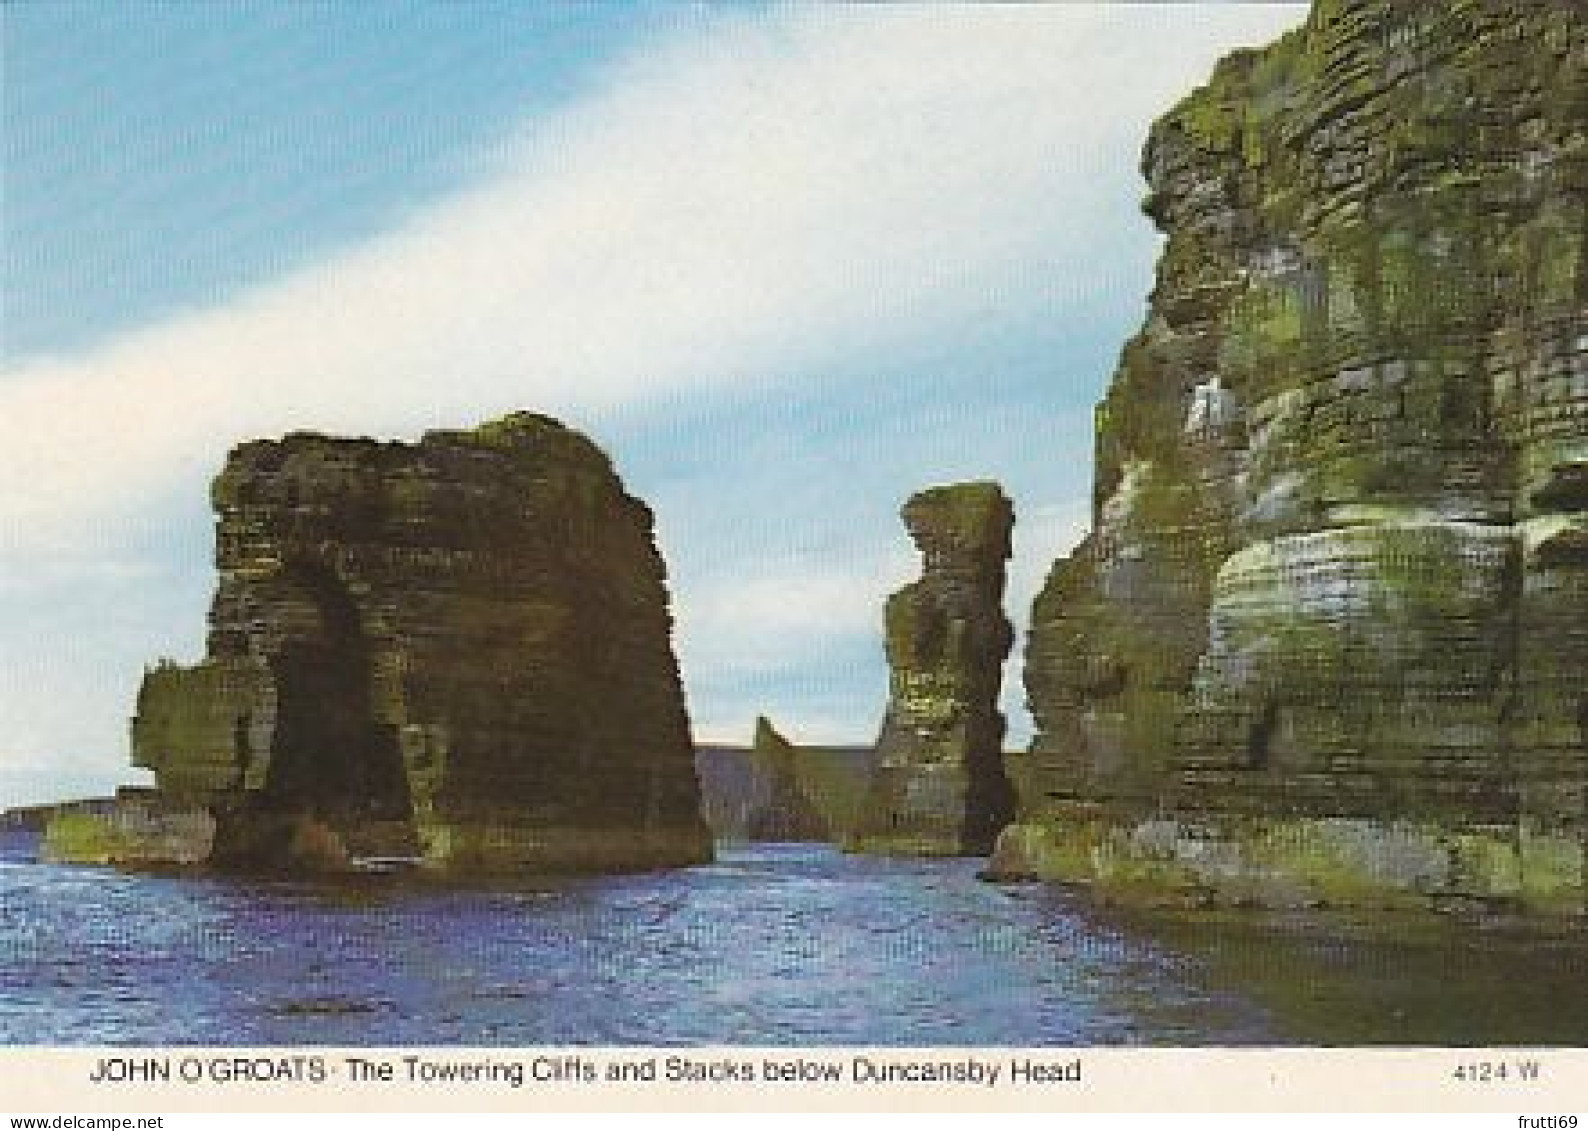 AK 173572 SCOTLAND - John O'Groats - The Towering Cliffs And Stacks Below Duncansby Head - Caithness